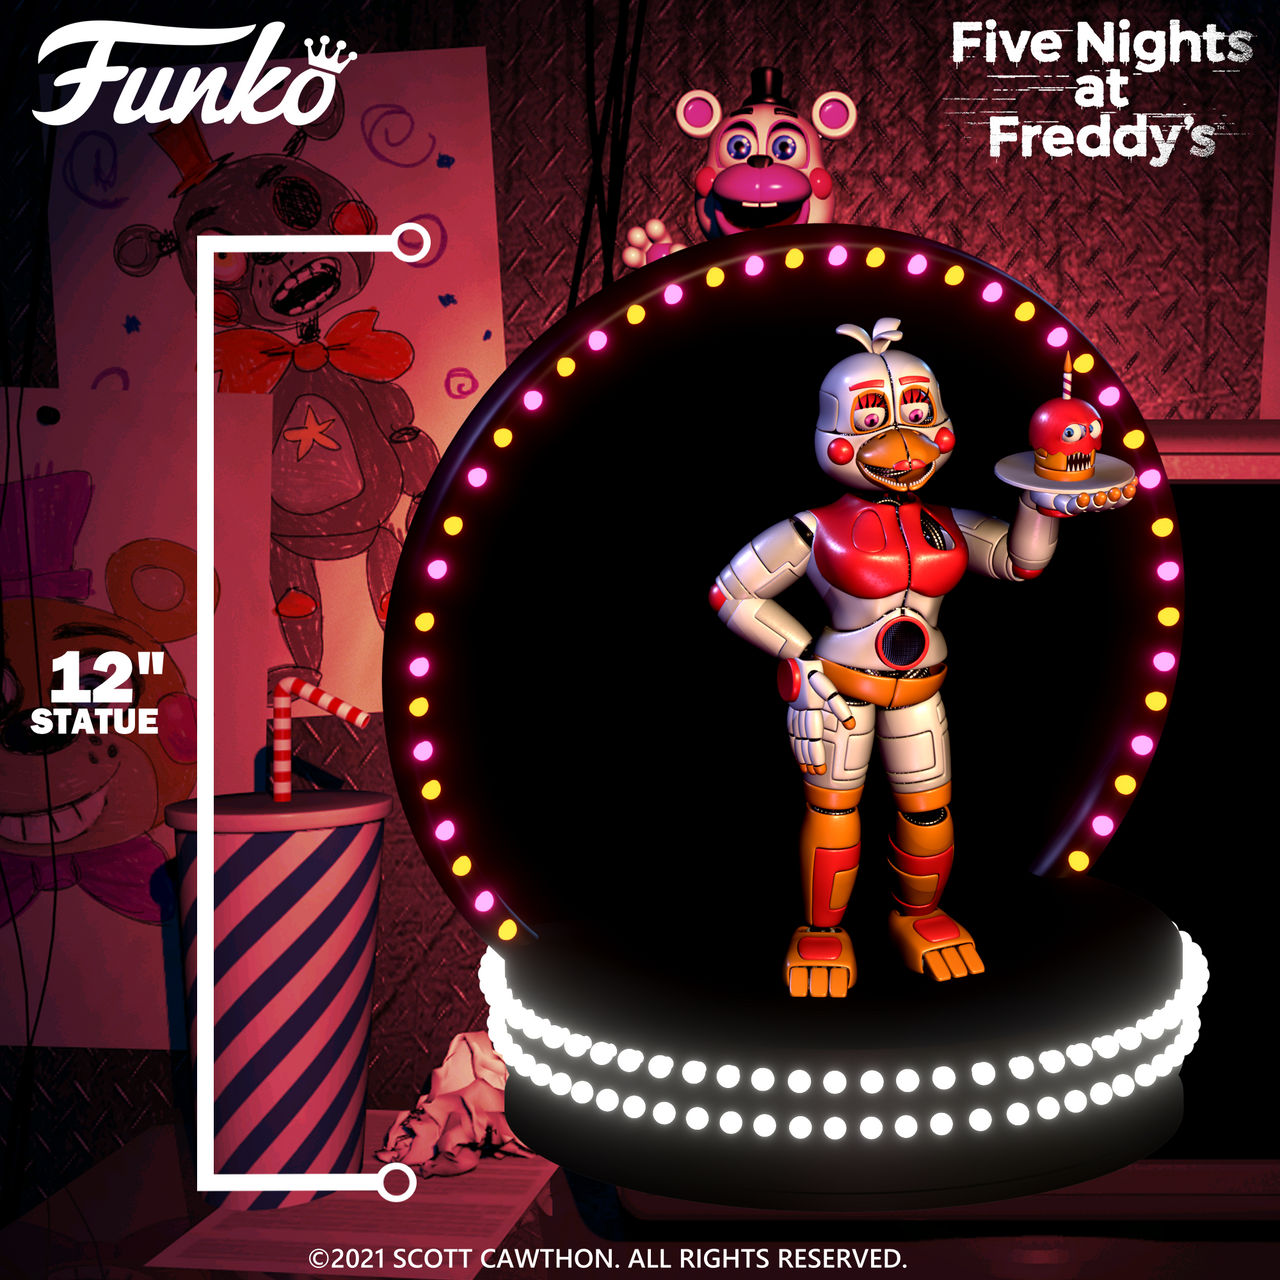 Funtime Chica V.1 Release by Thudner on DeviantArt